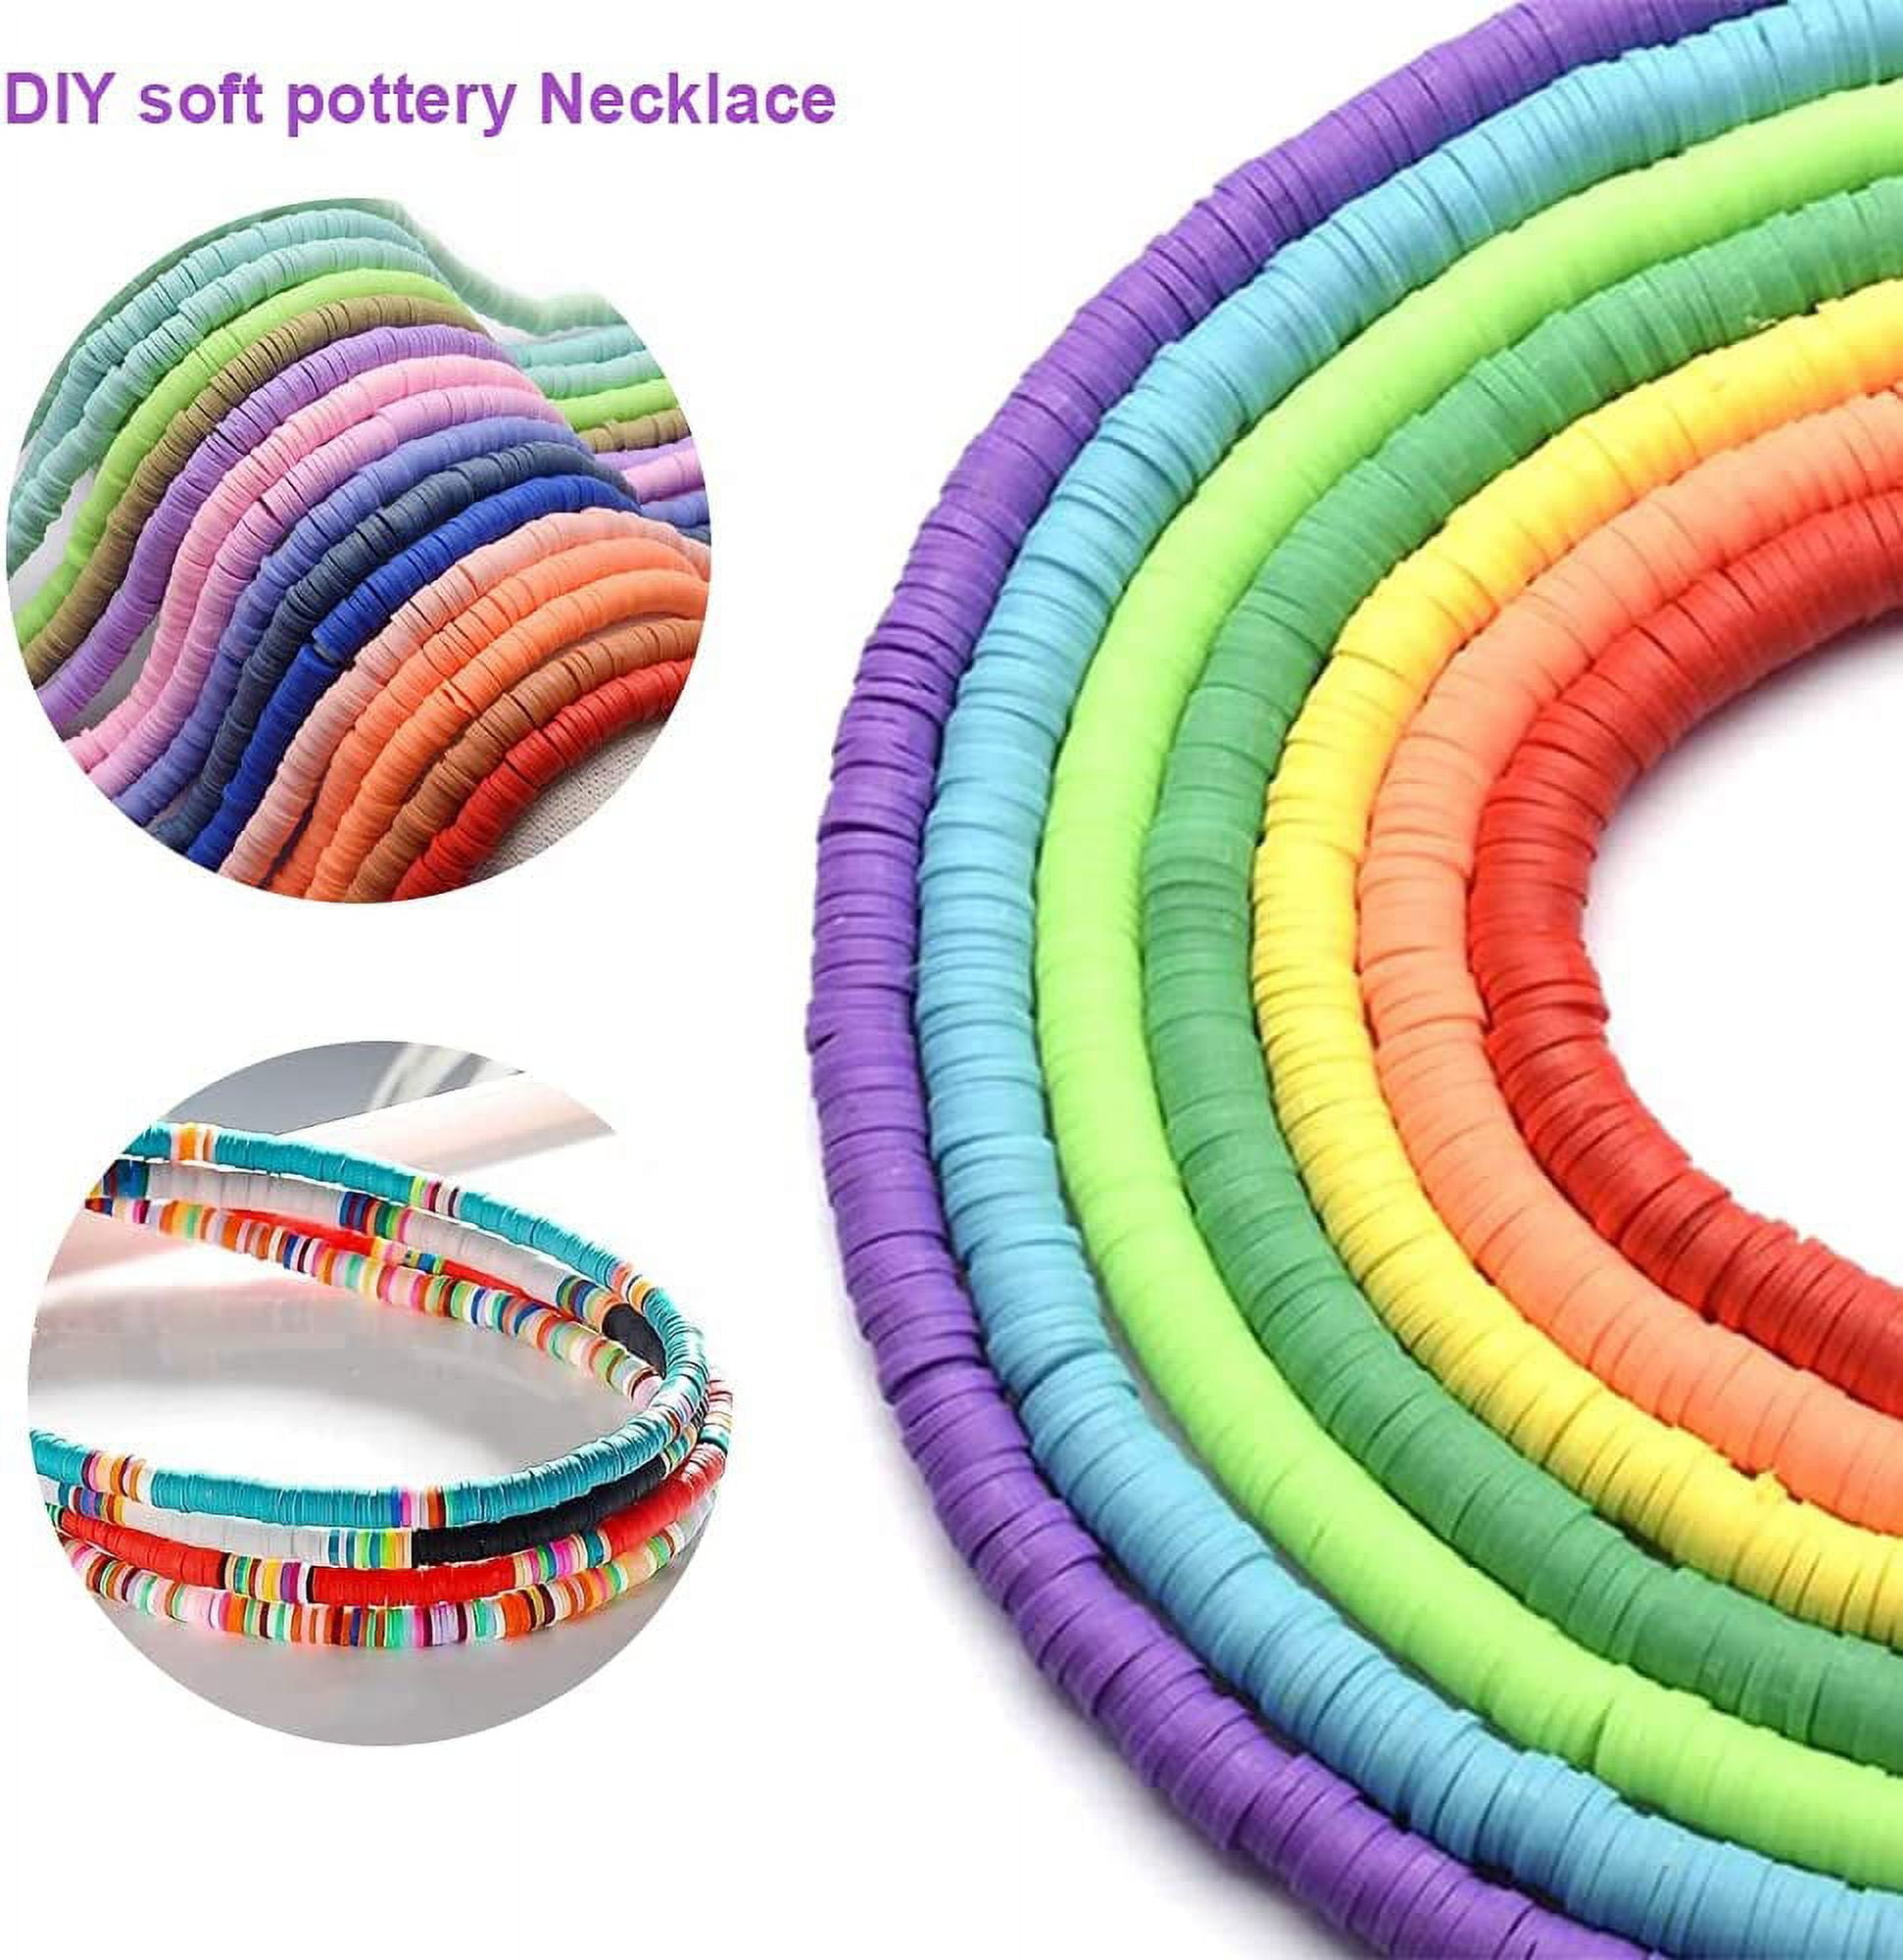 DEARLIVES Heishi Beads, 18 Strands 6mm Colorful Round Flat Polymer Clay  Beads on String for Jewelry Making, Clay Bead Stands Flat Beads for  Bracelets Earring and Necklace Making